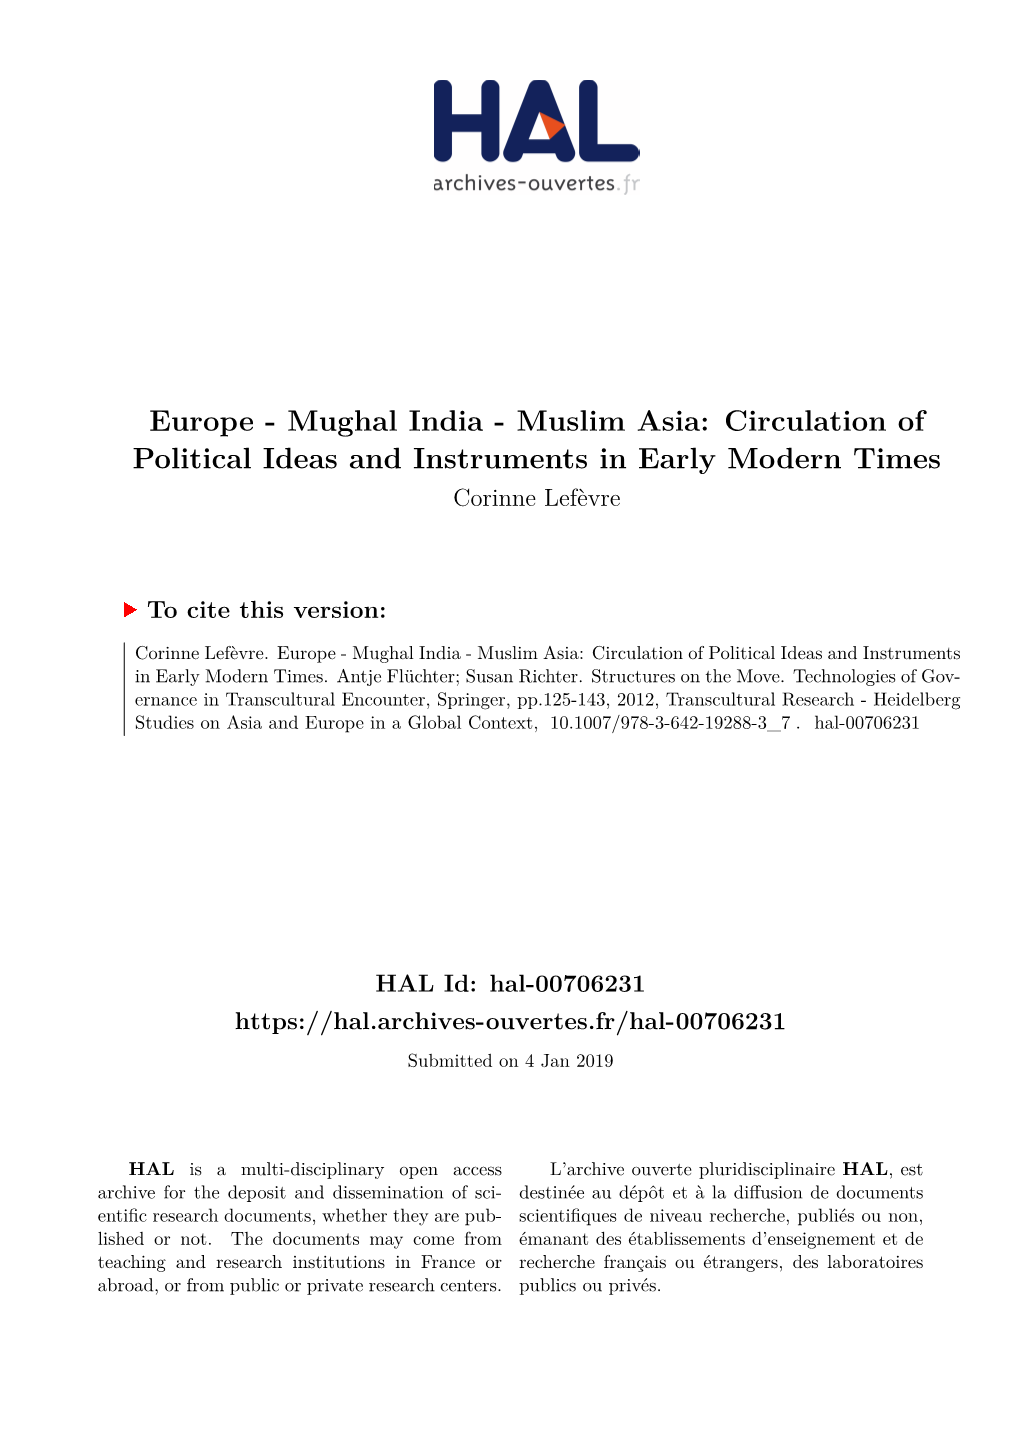 Mughal India - Muslim Asia: Circulation of Political Ideas and Instruments in Early Modern Times Corinne Lefèvre